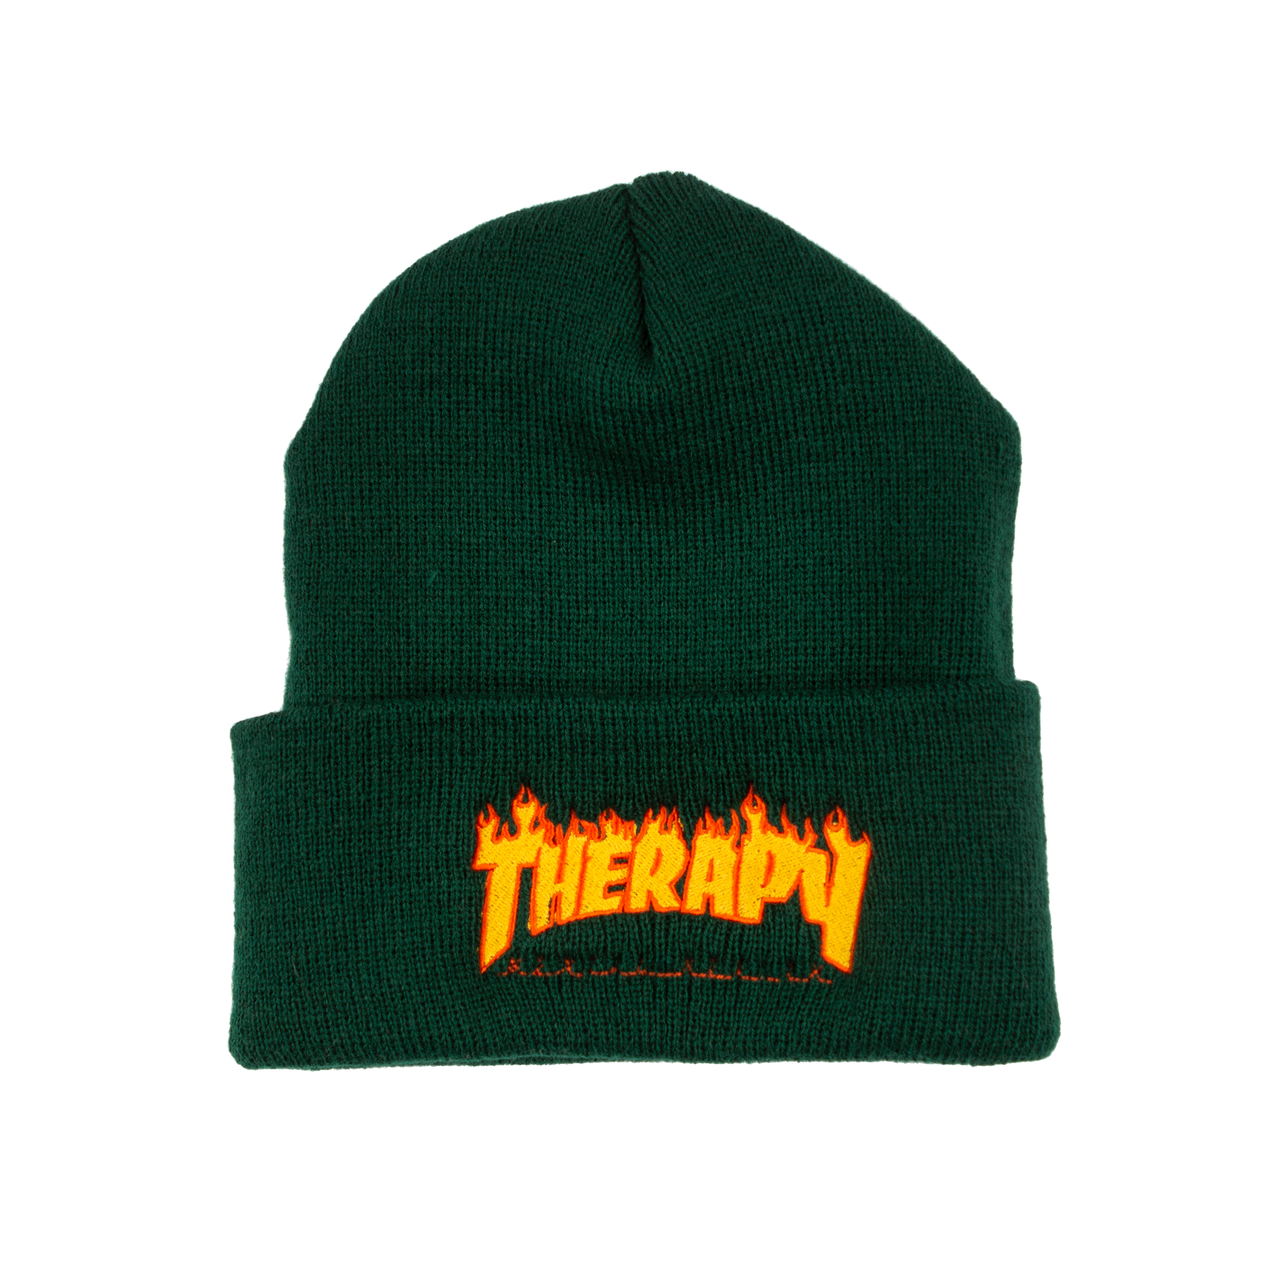 Therapy Hat Beanie (Green)